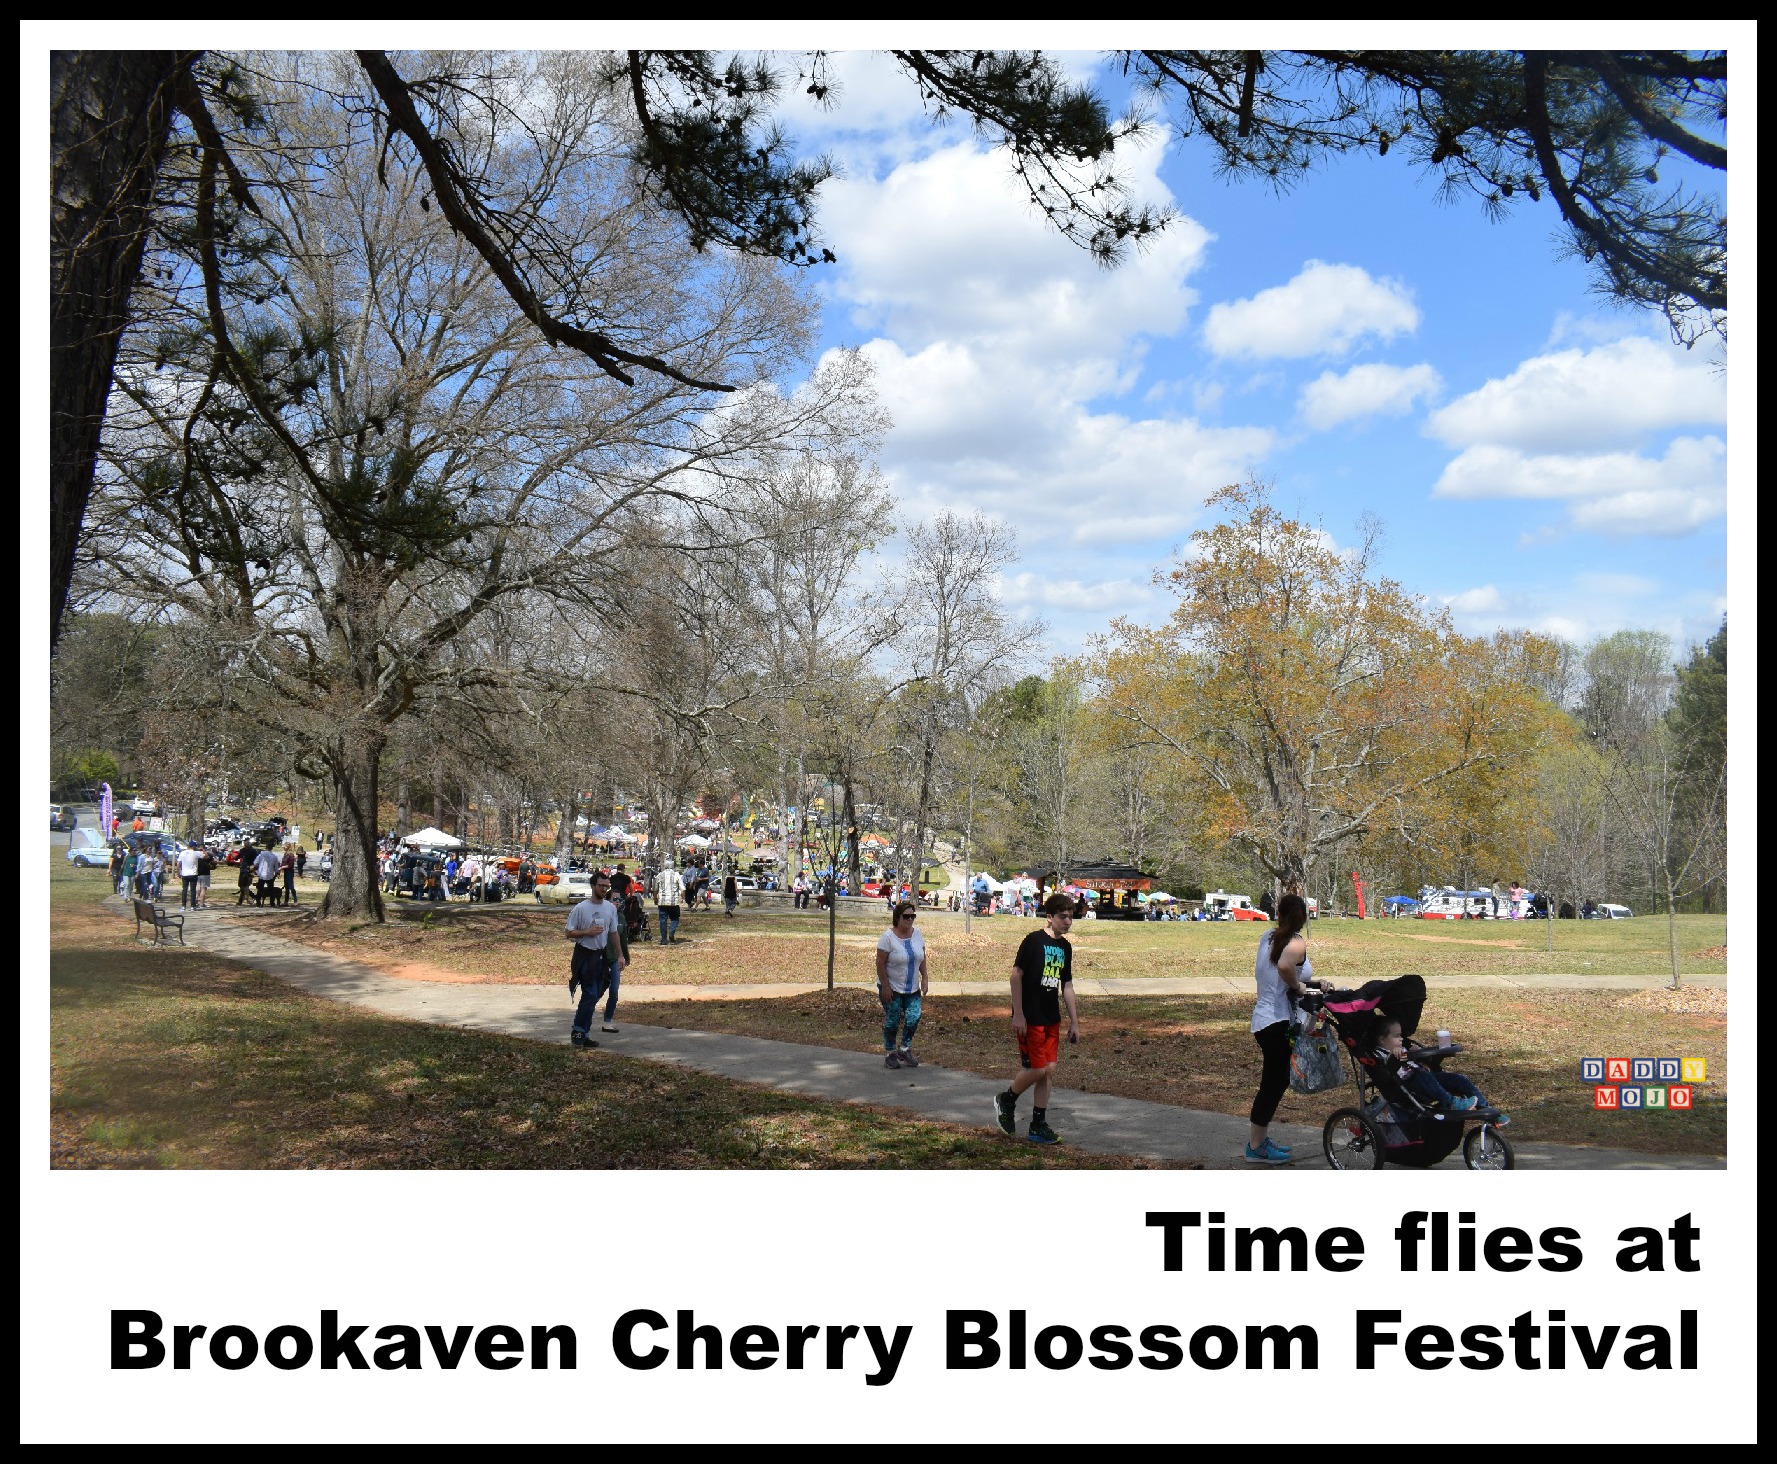 Time flies at Brookaven Cherry Blossom Festival